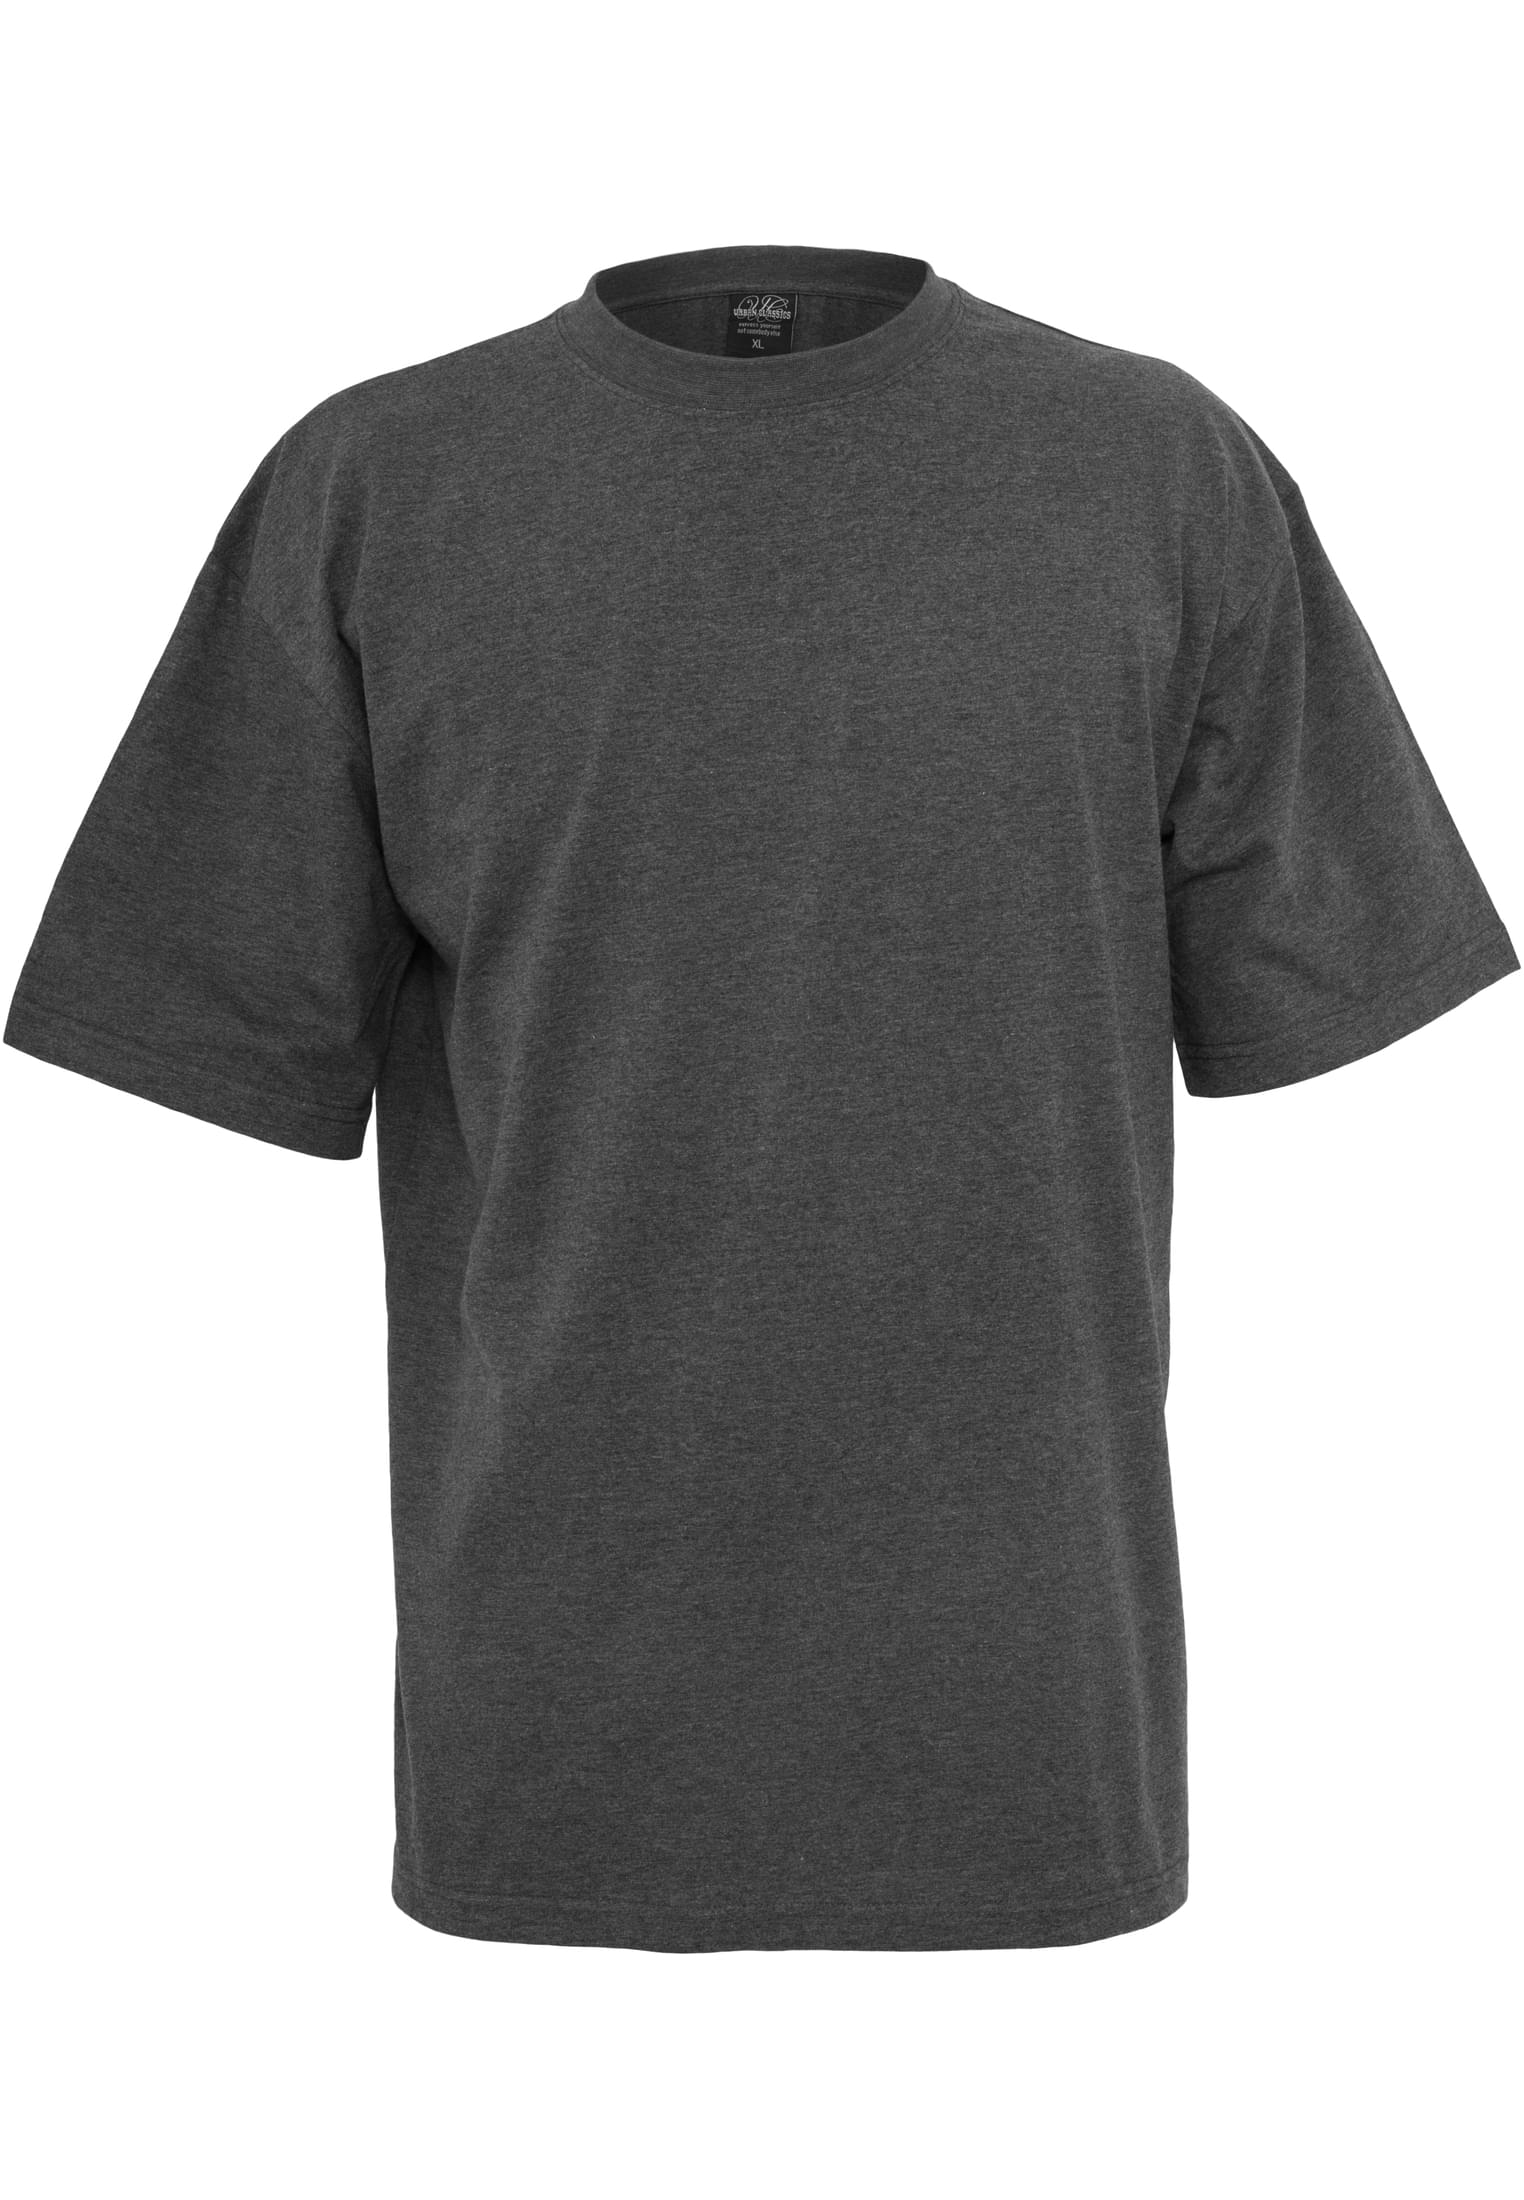 Plus Size Tall Tee in Farbe charcoal